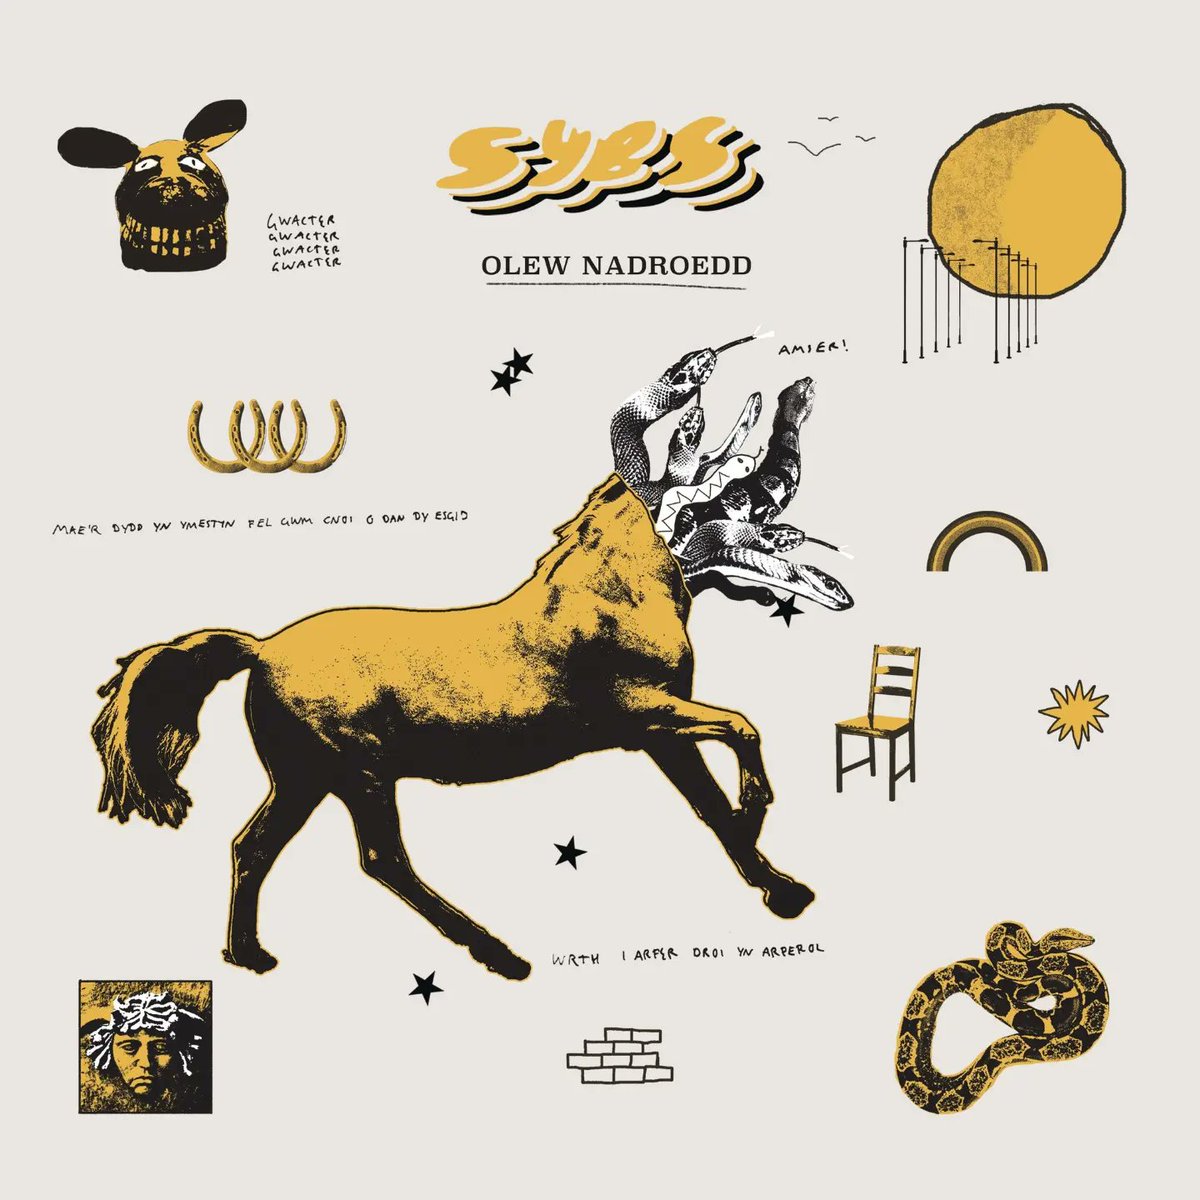 Thanks Michael @247MusicReport for reviewing brand new @SYBSband debut album 'Olew Nadroedd' which is available now via @LibertinoRecs Read the full article here thedailymusicreport.com/reviews/sybs-o…